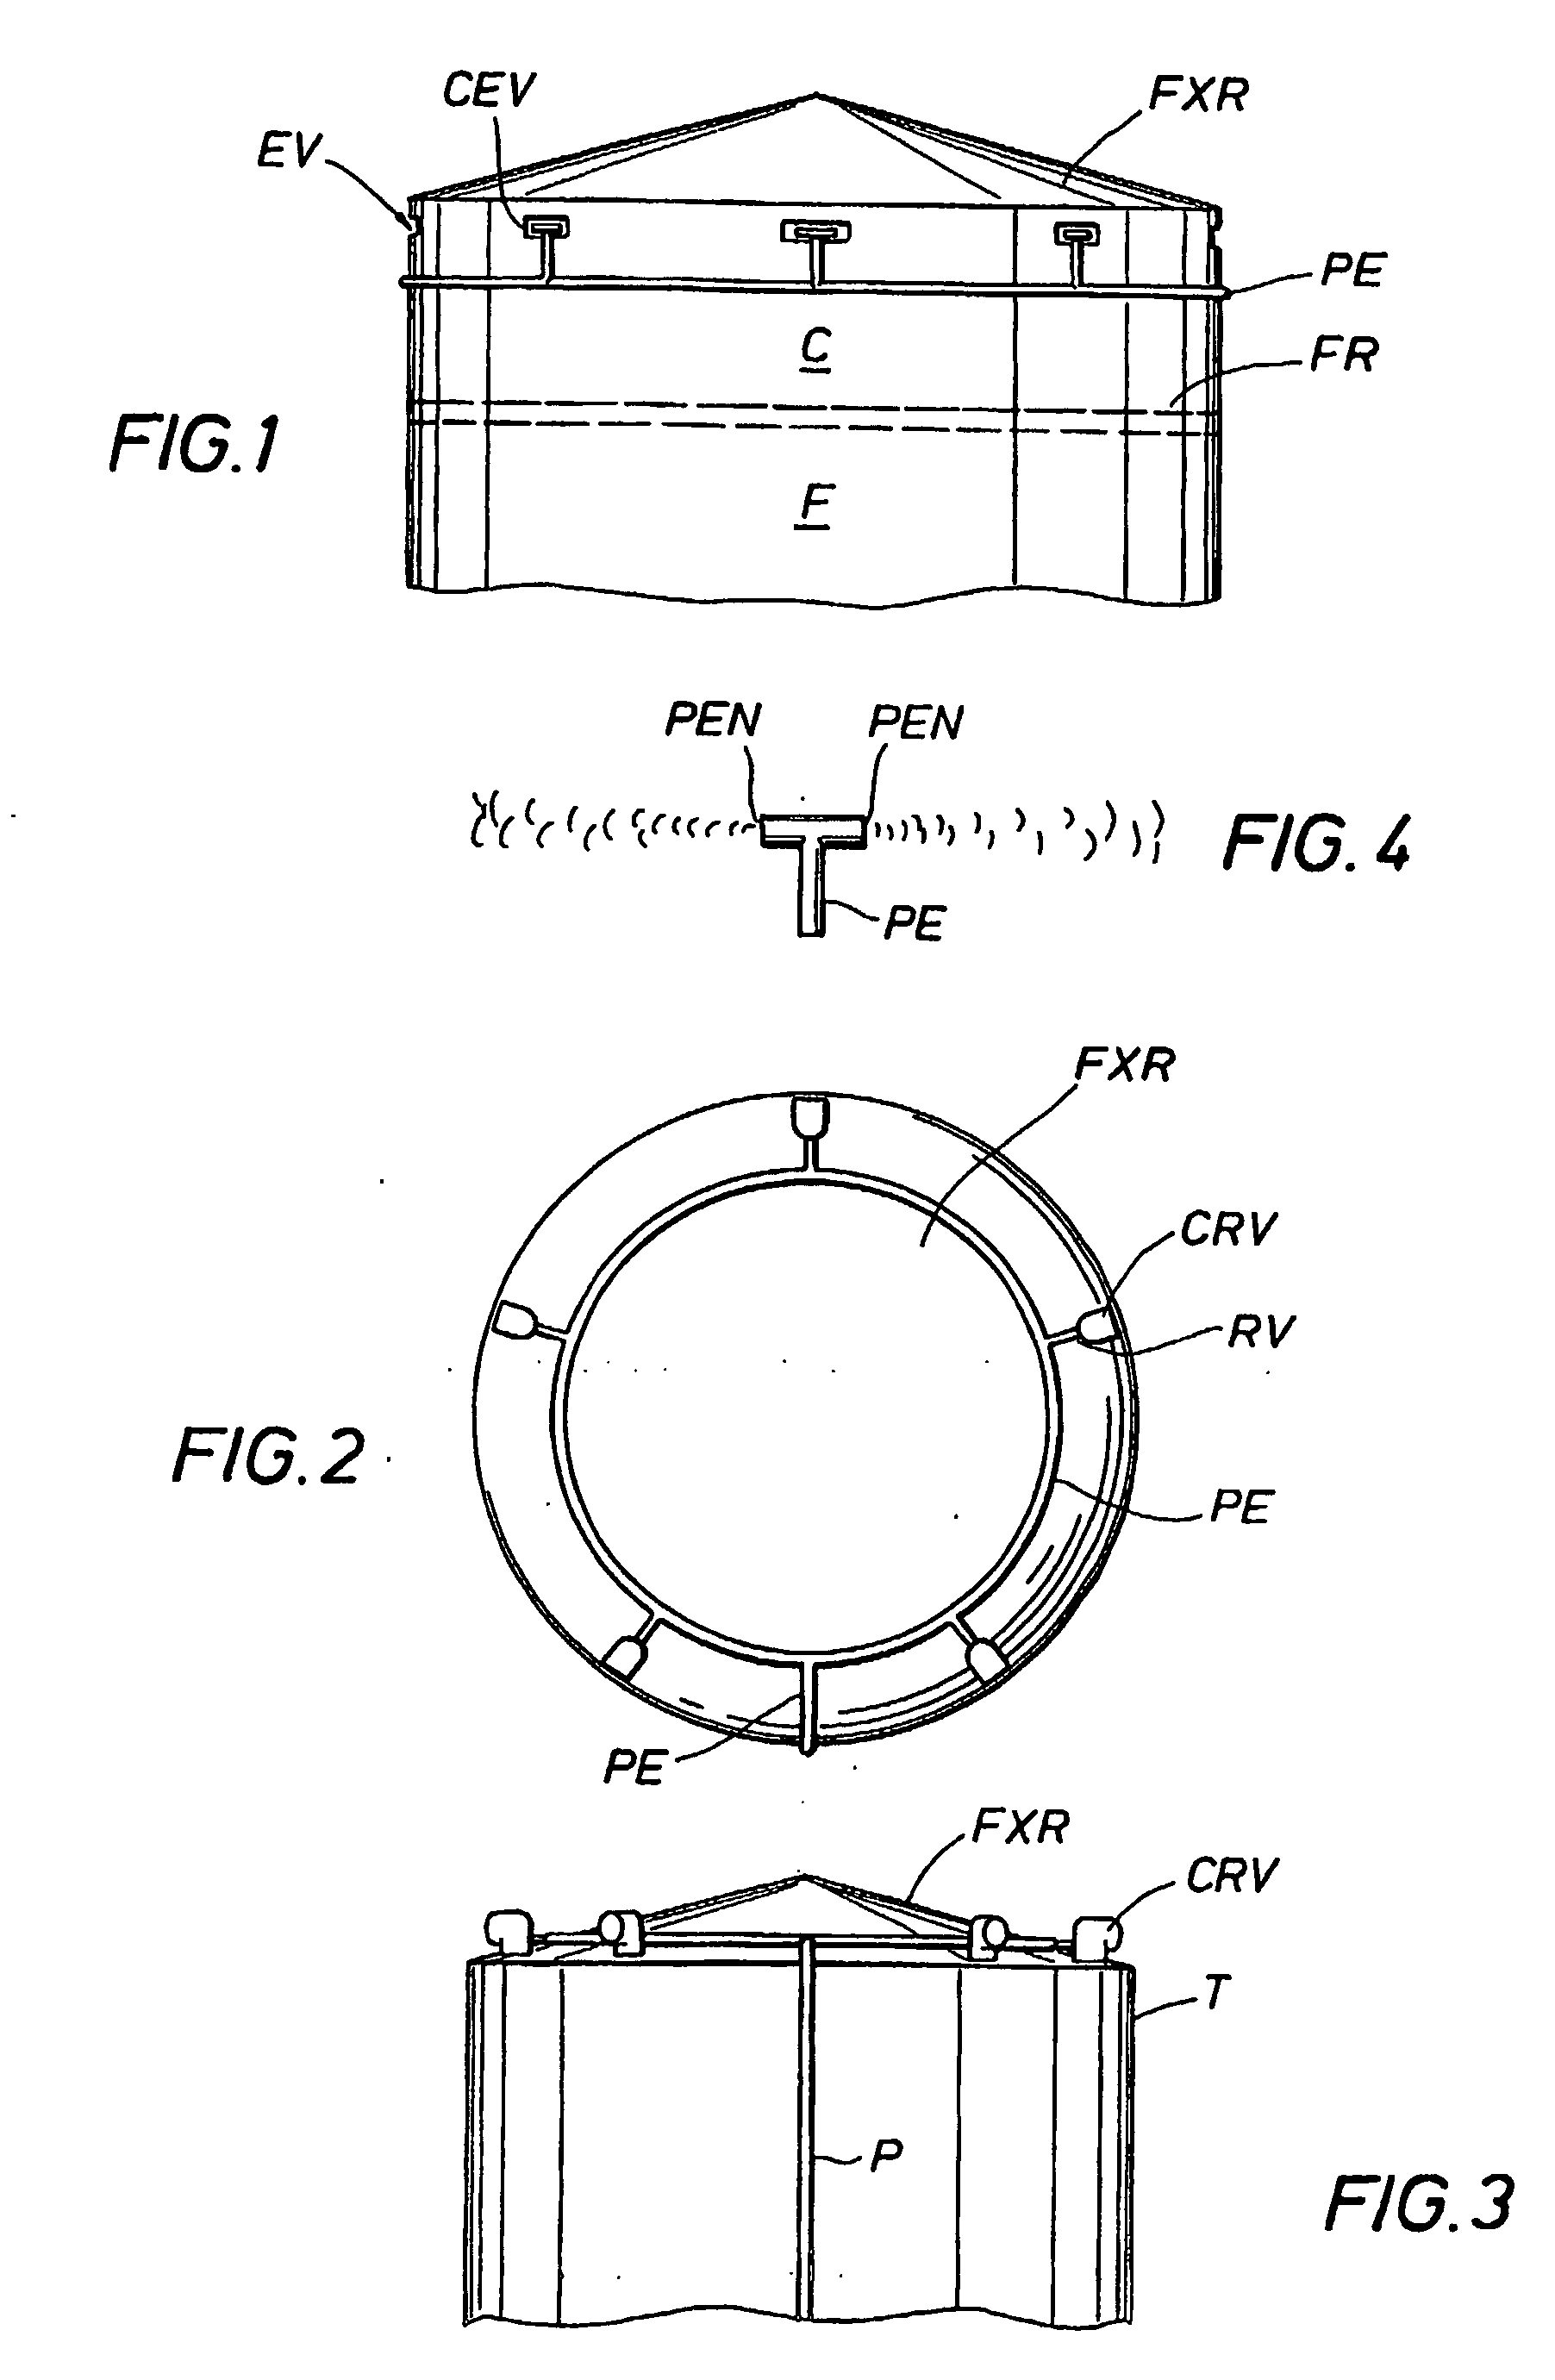 Dry chemical system for extinguishing difficult fuel or flammable liquid fires in an industrial tank with a roof creating space above the liquid